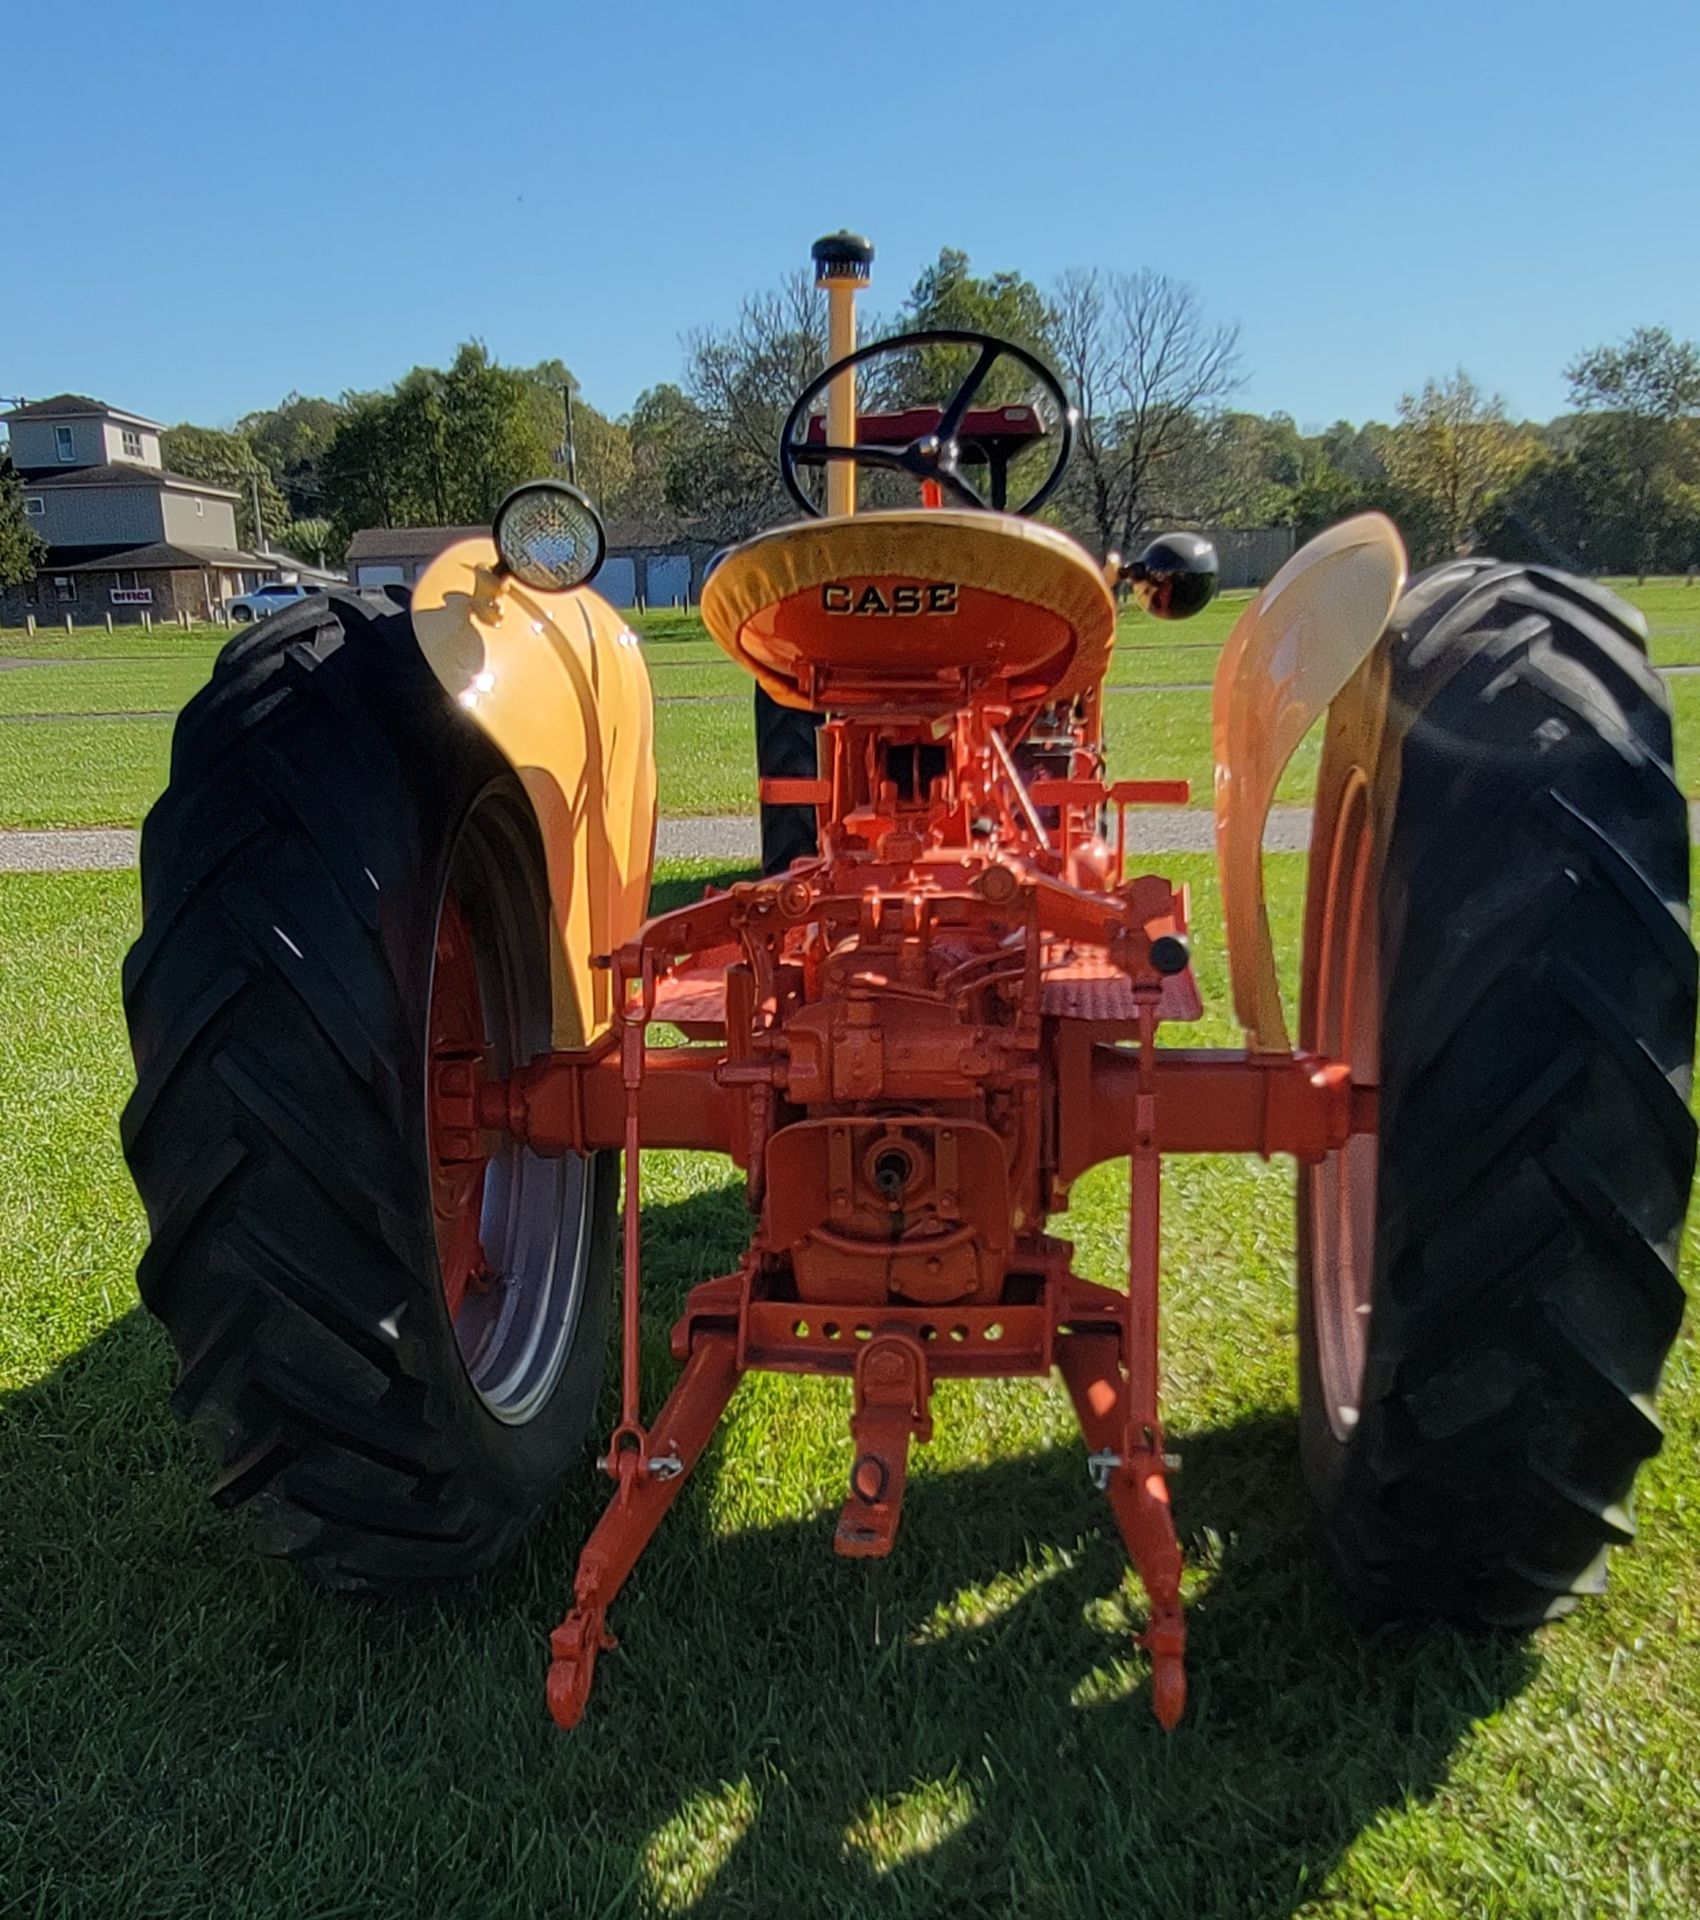 1956 Case 400 Row Crop Tractor, Model 411, s/n 8081224, Gasoline Engine, New in 1956, Restored - Image 3 of 32